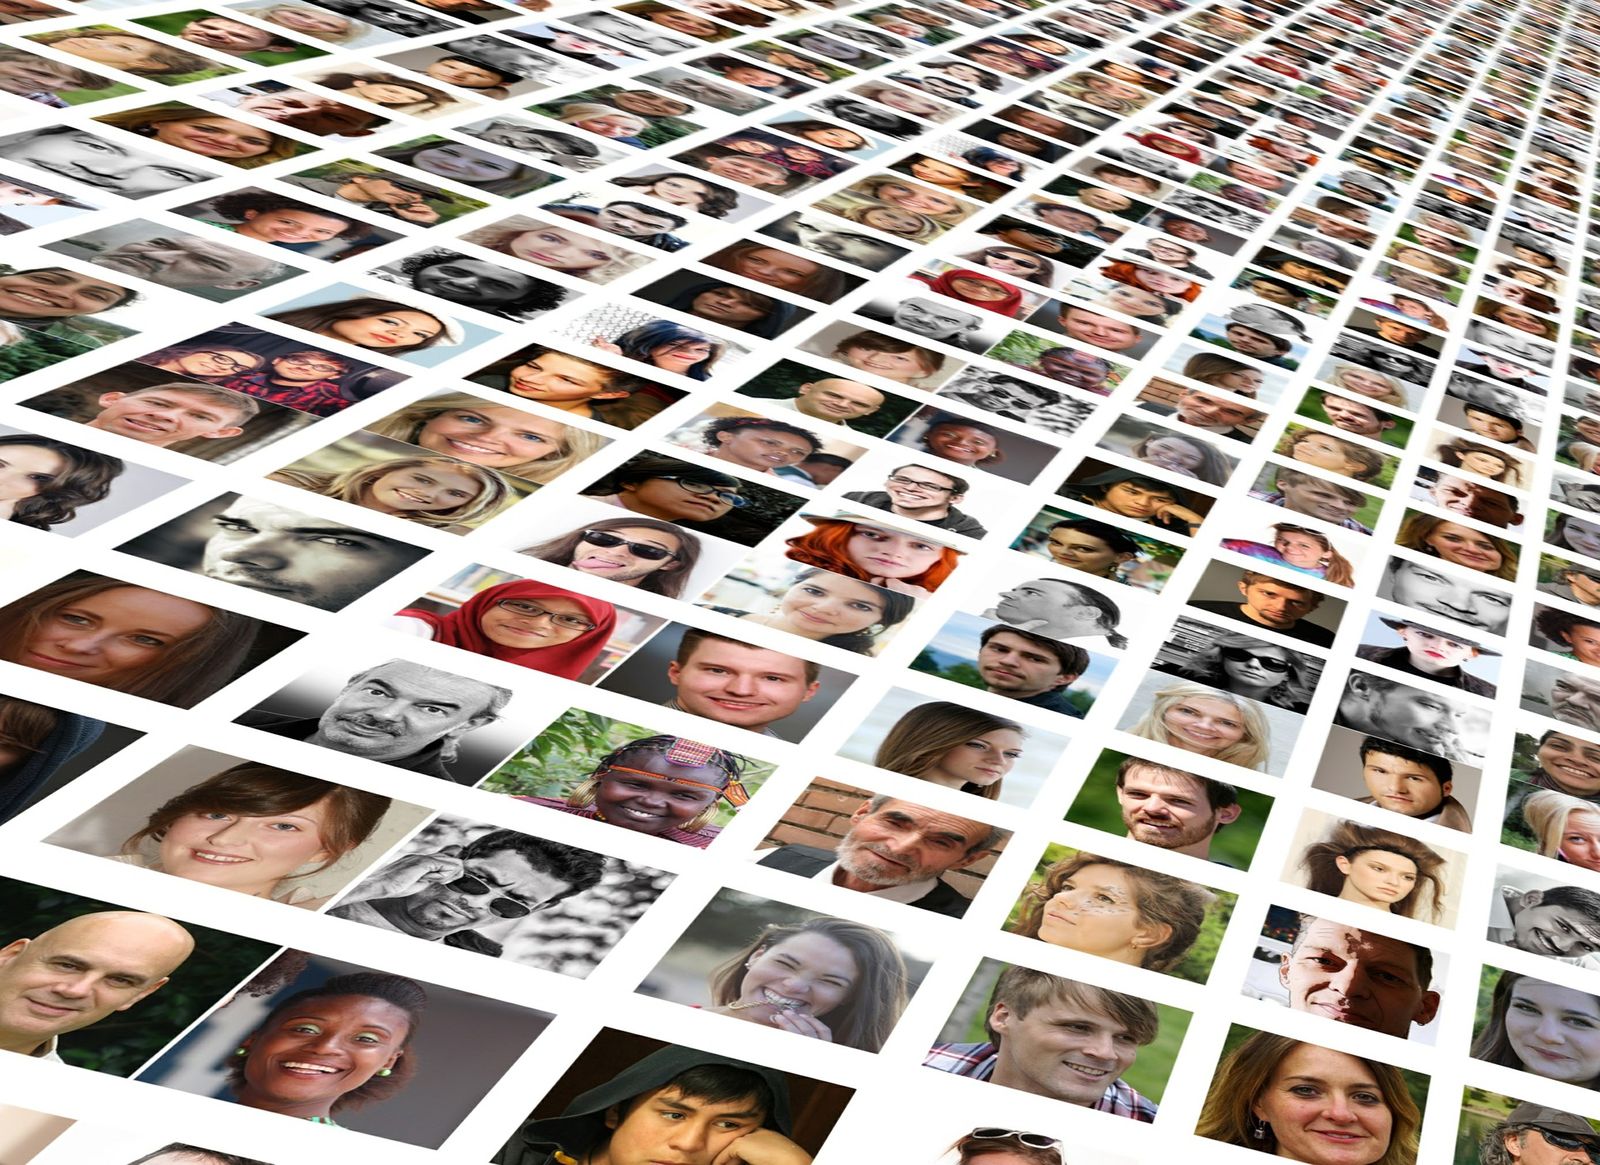 The Average Person Can Recognize 5,000 Faces | Smart News|
 Smithsonian Magazine